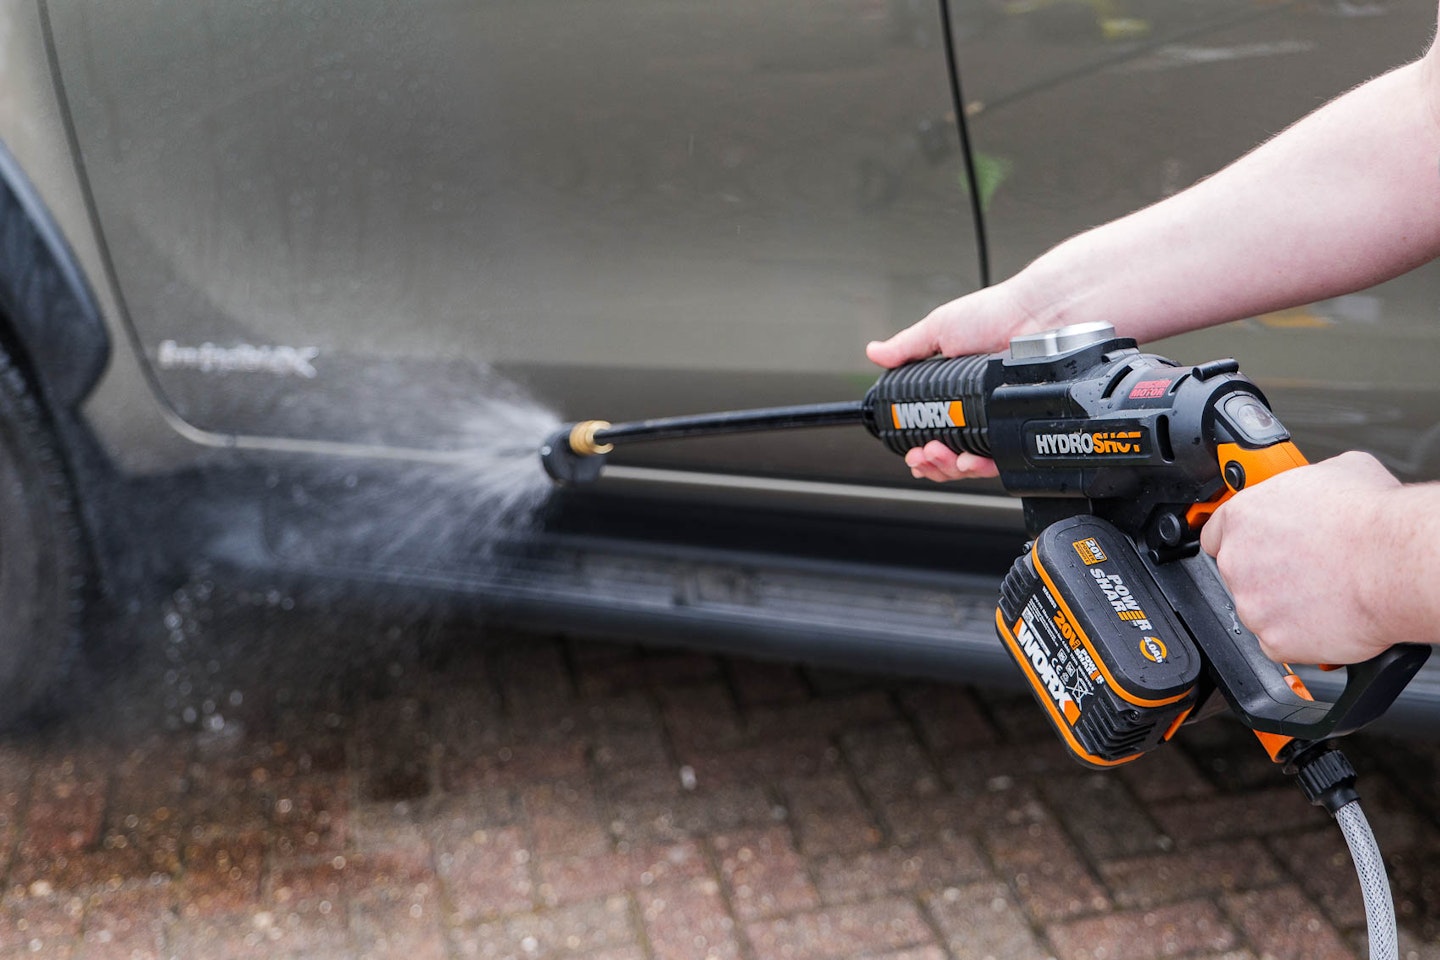 The Worx power washer in action cleaning a wheel